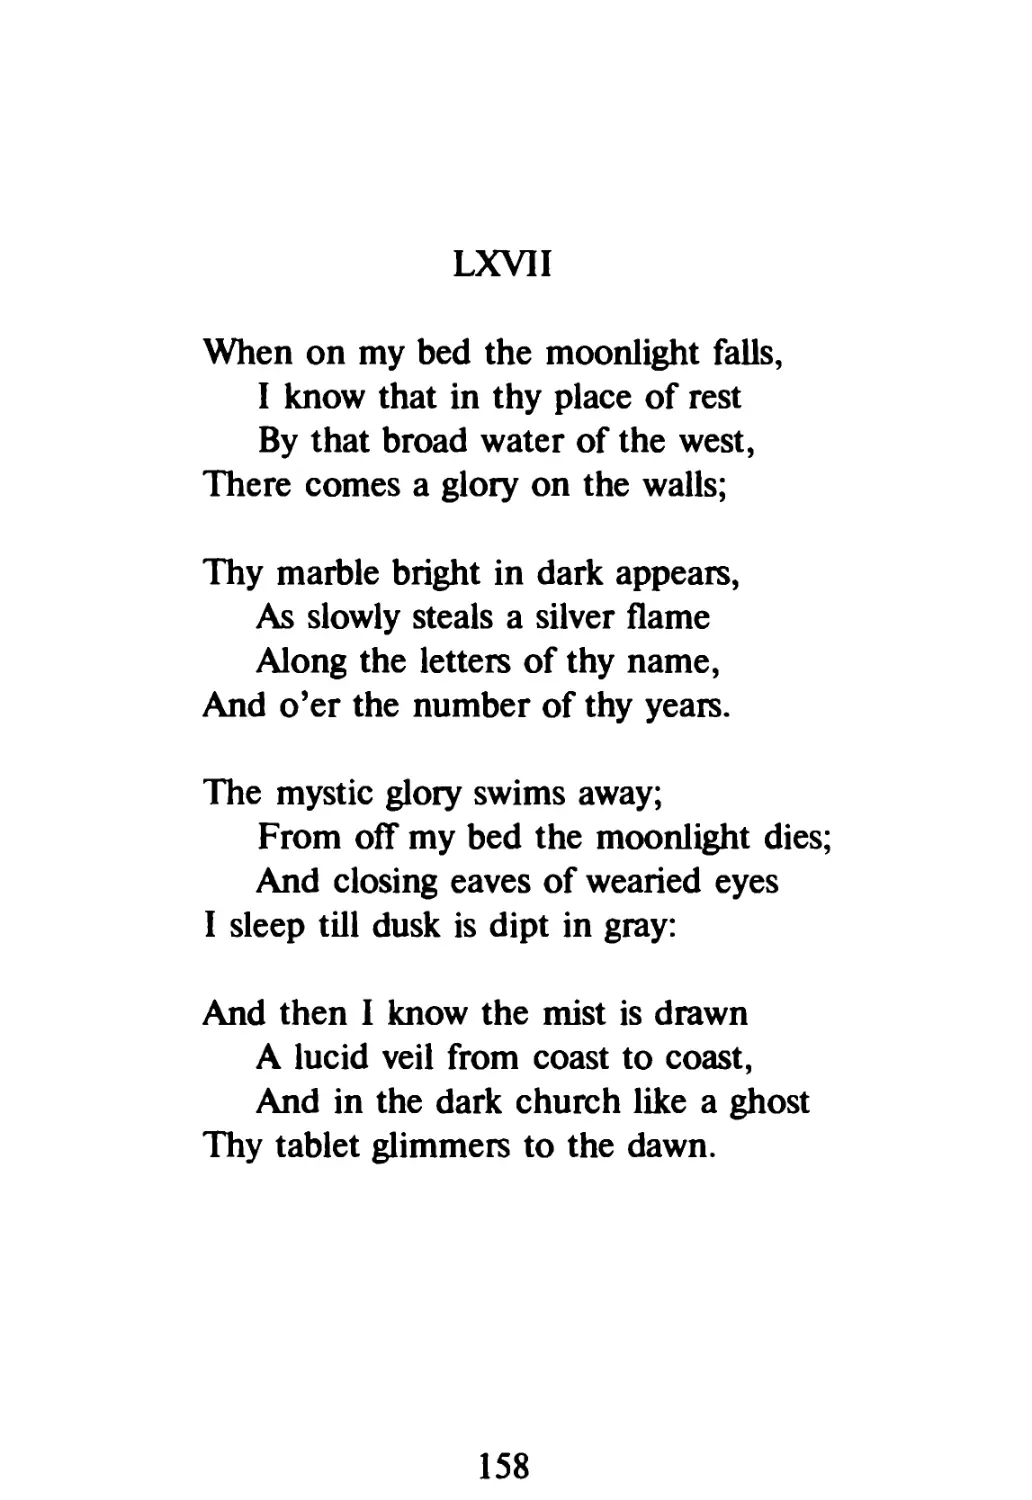 LXVII 'When on my bed the moonlight falls...'